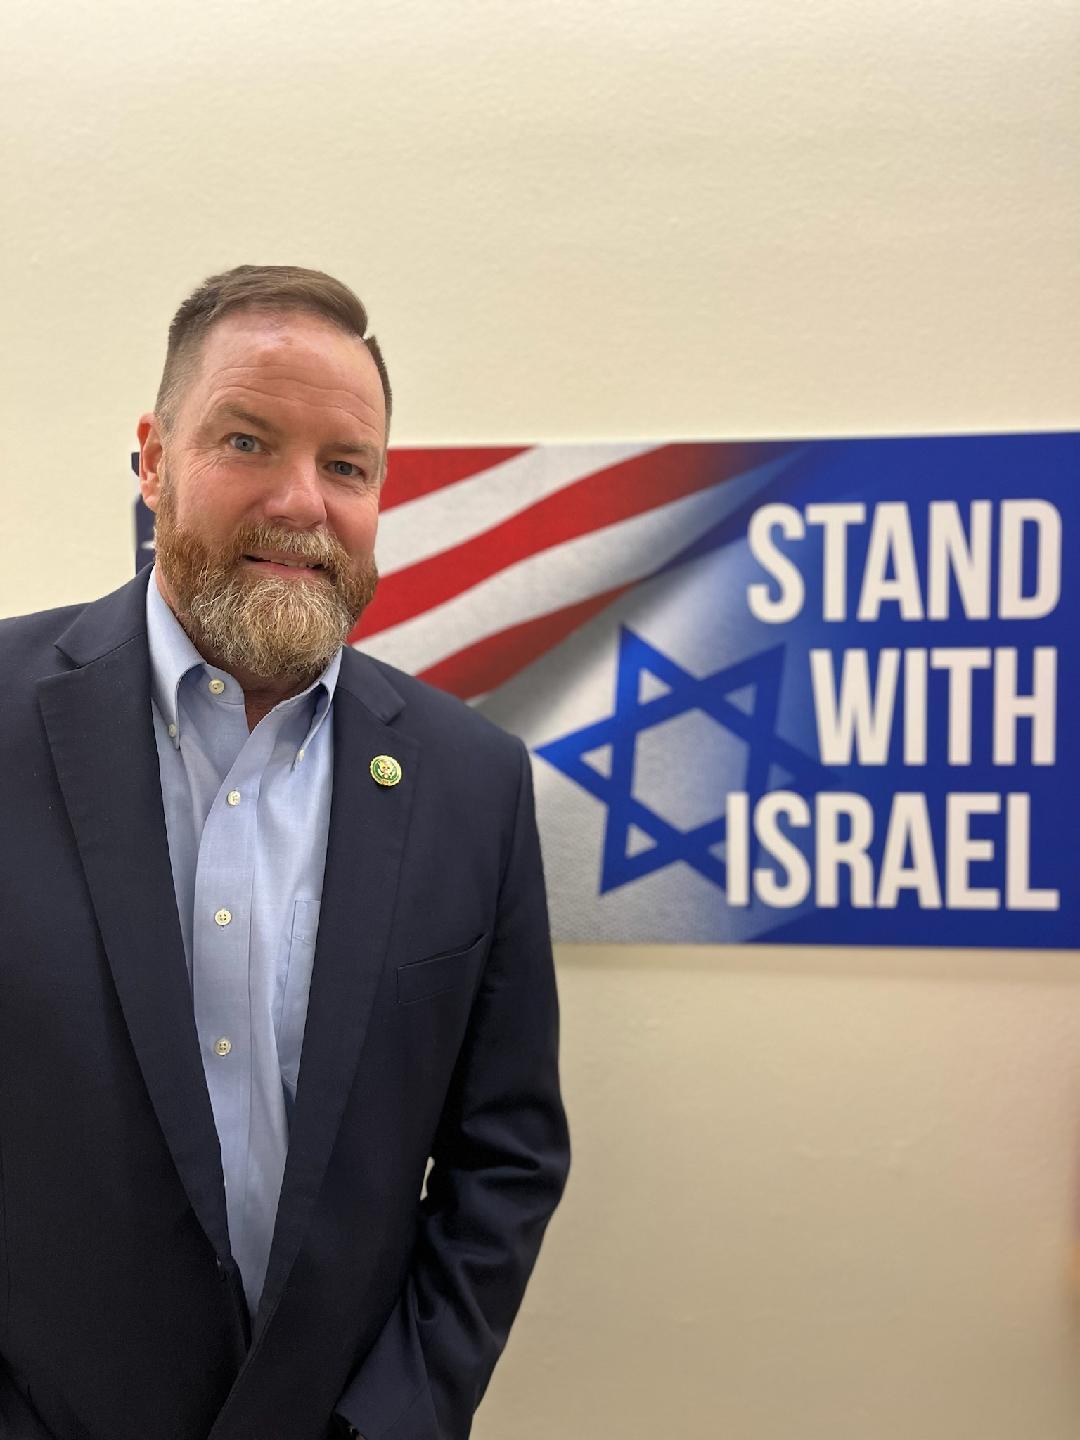 U.S. Congressman (R-Fla.) Aaron Bean poses in front of a "Stand with Israel" sign. (Courtesy of Rep. Aaron Bean)